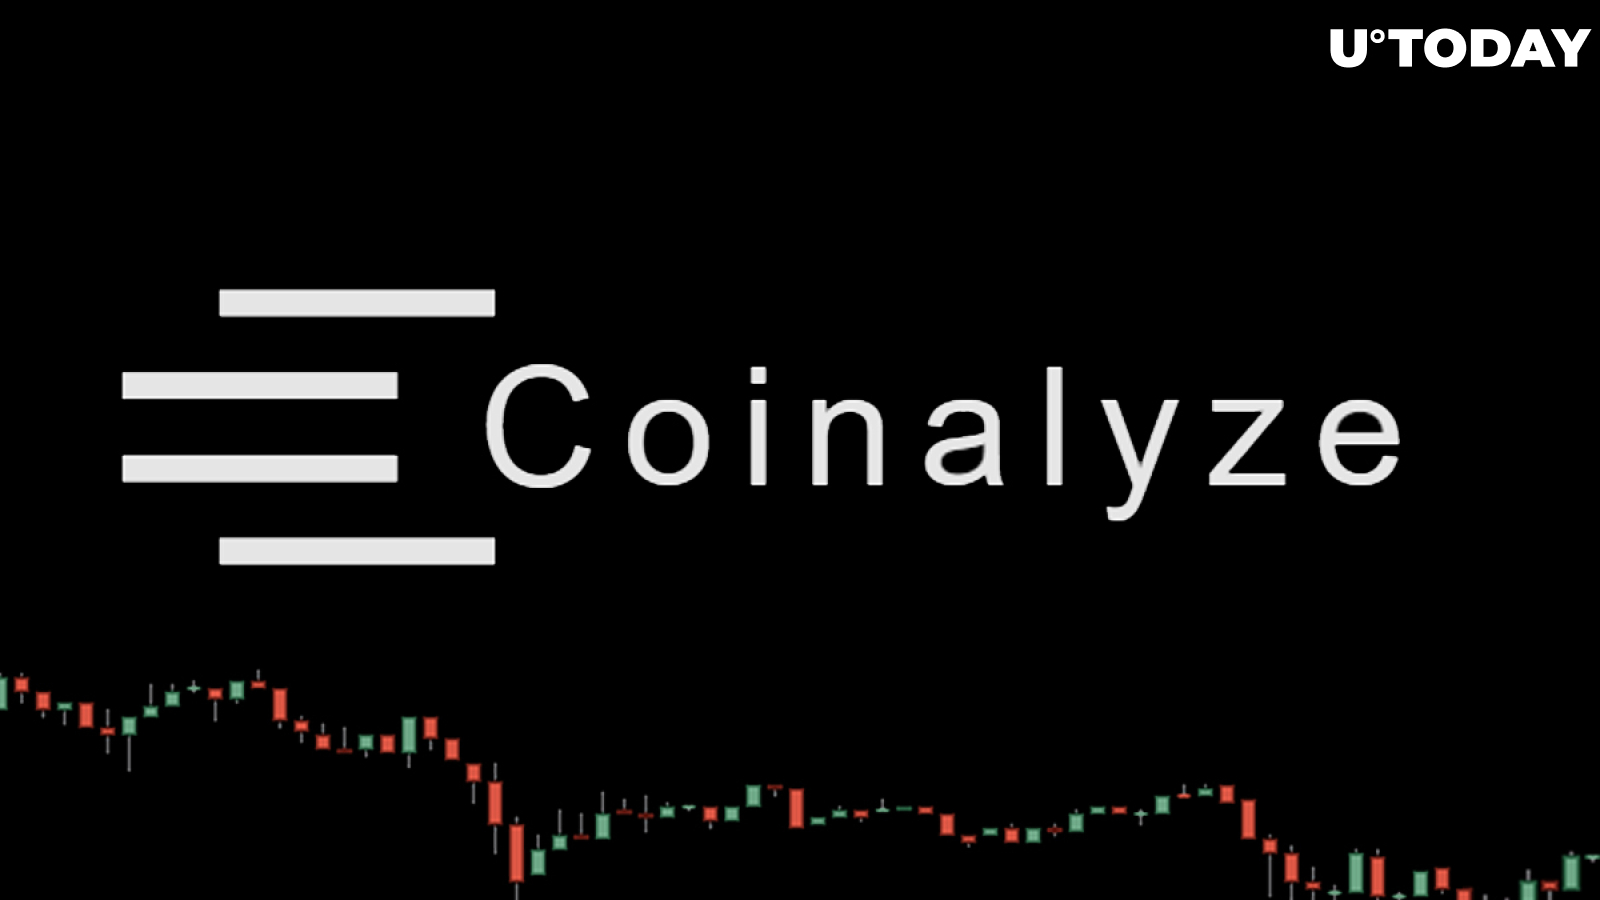 Cryptocurrency Analytical Platform Coinalyze and U.Today Now are Partners